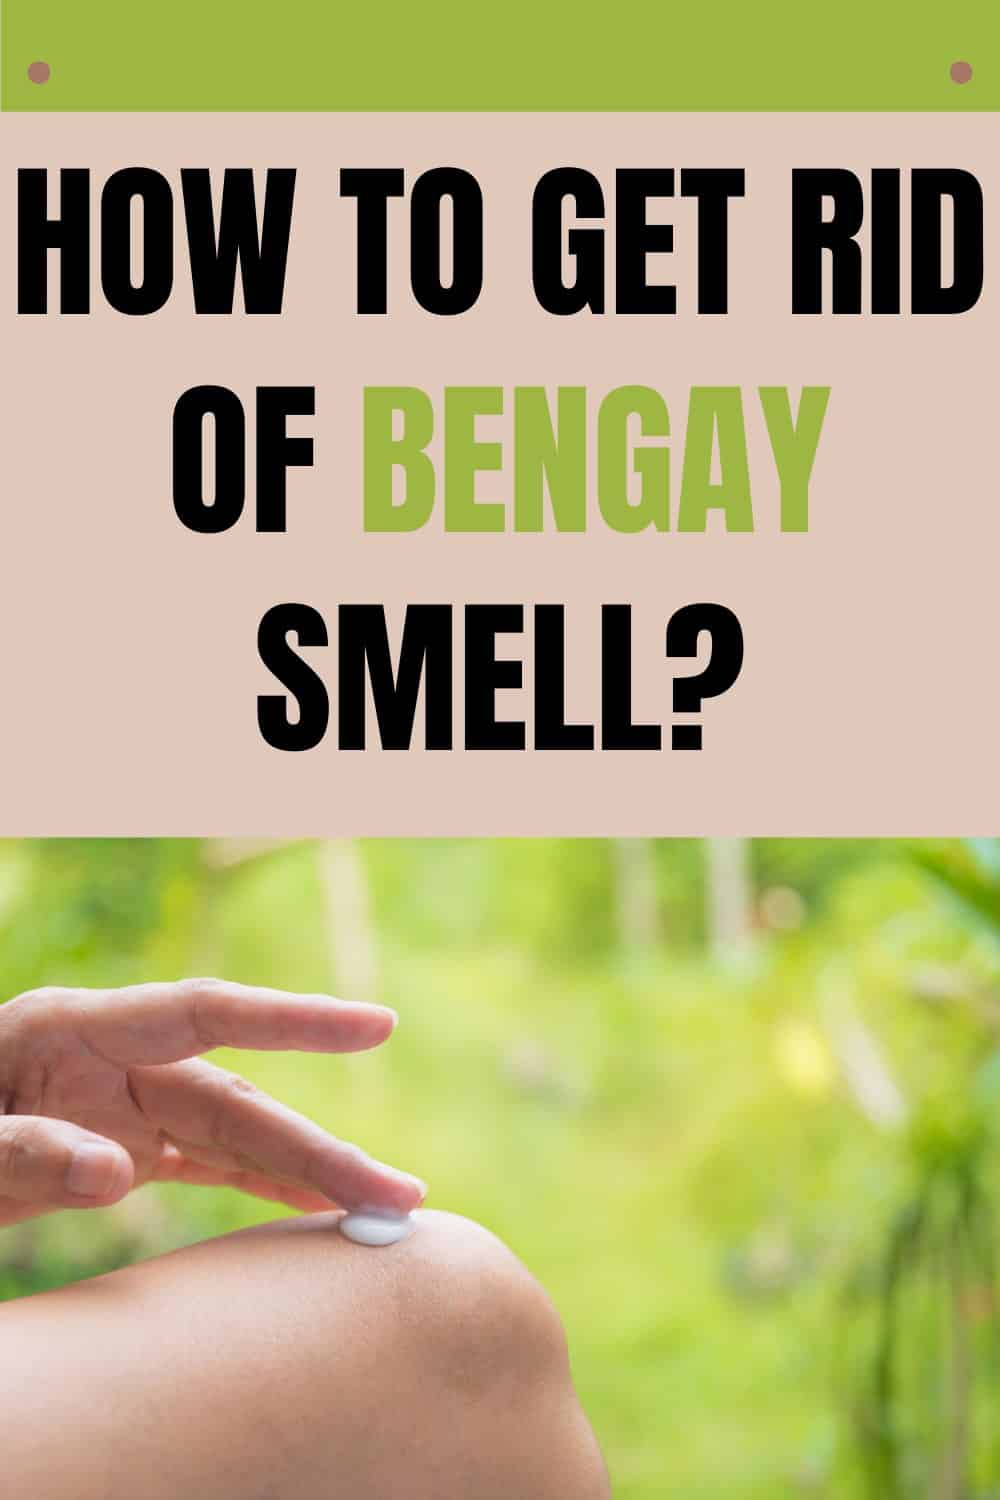 Remove the smell of Bengay